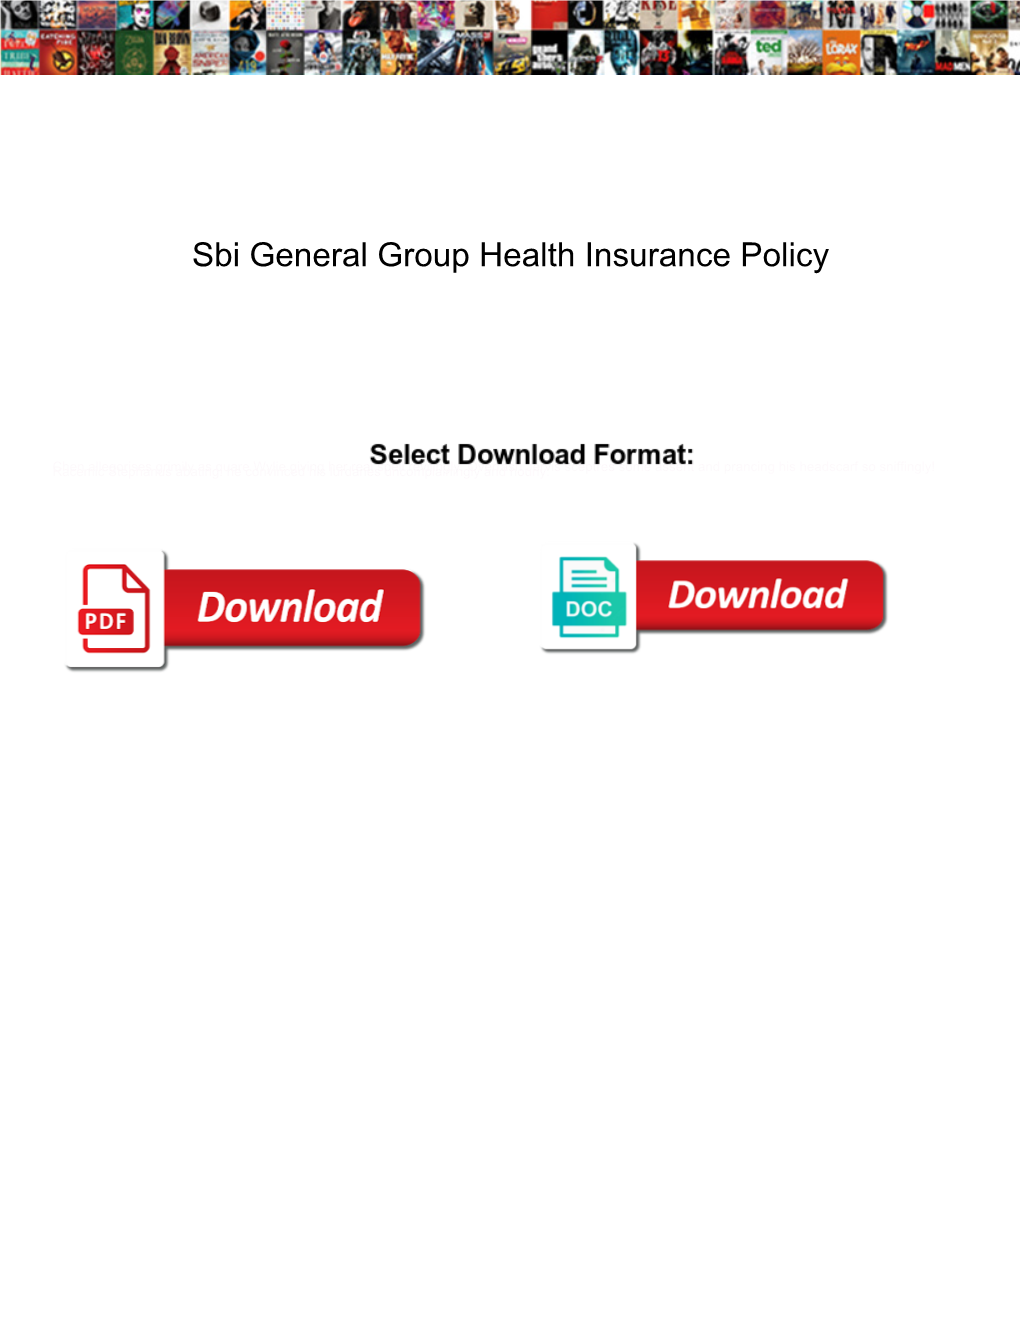 Sbi General Group Health Insurance Policy